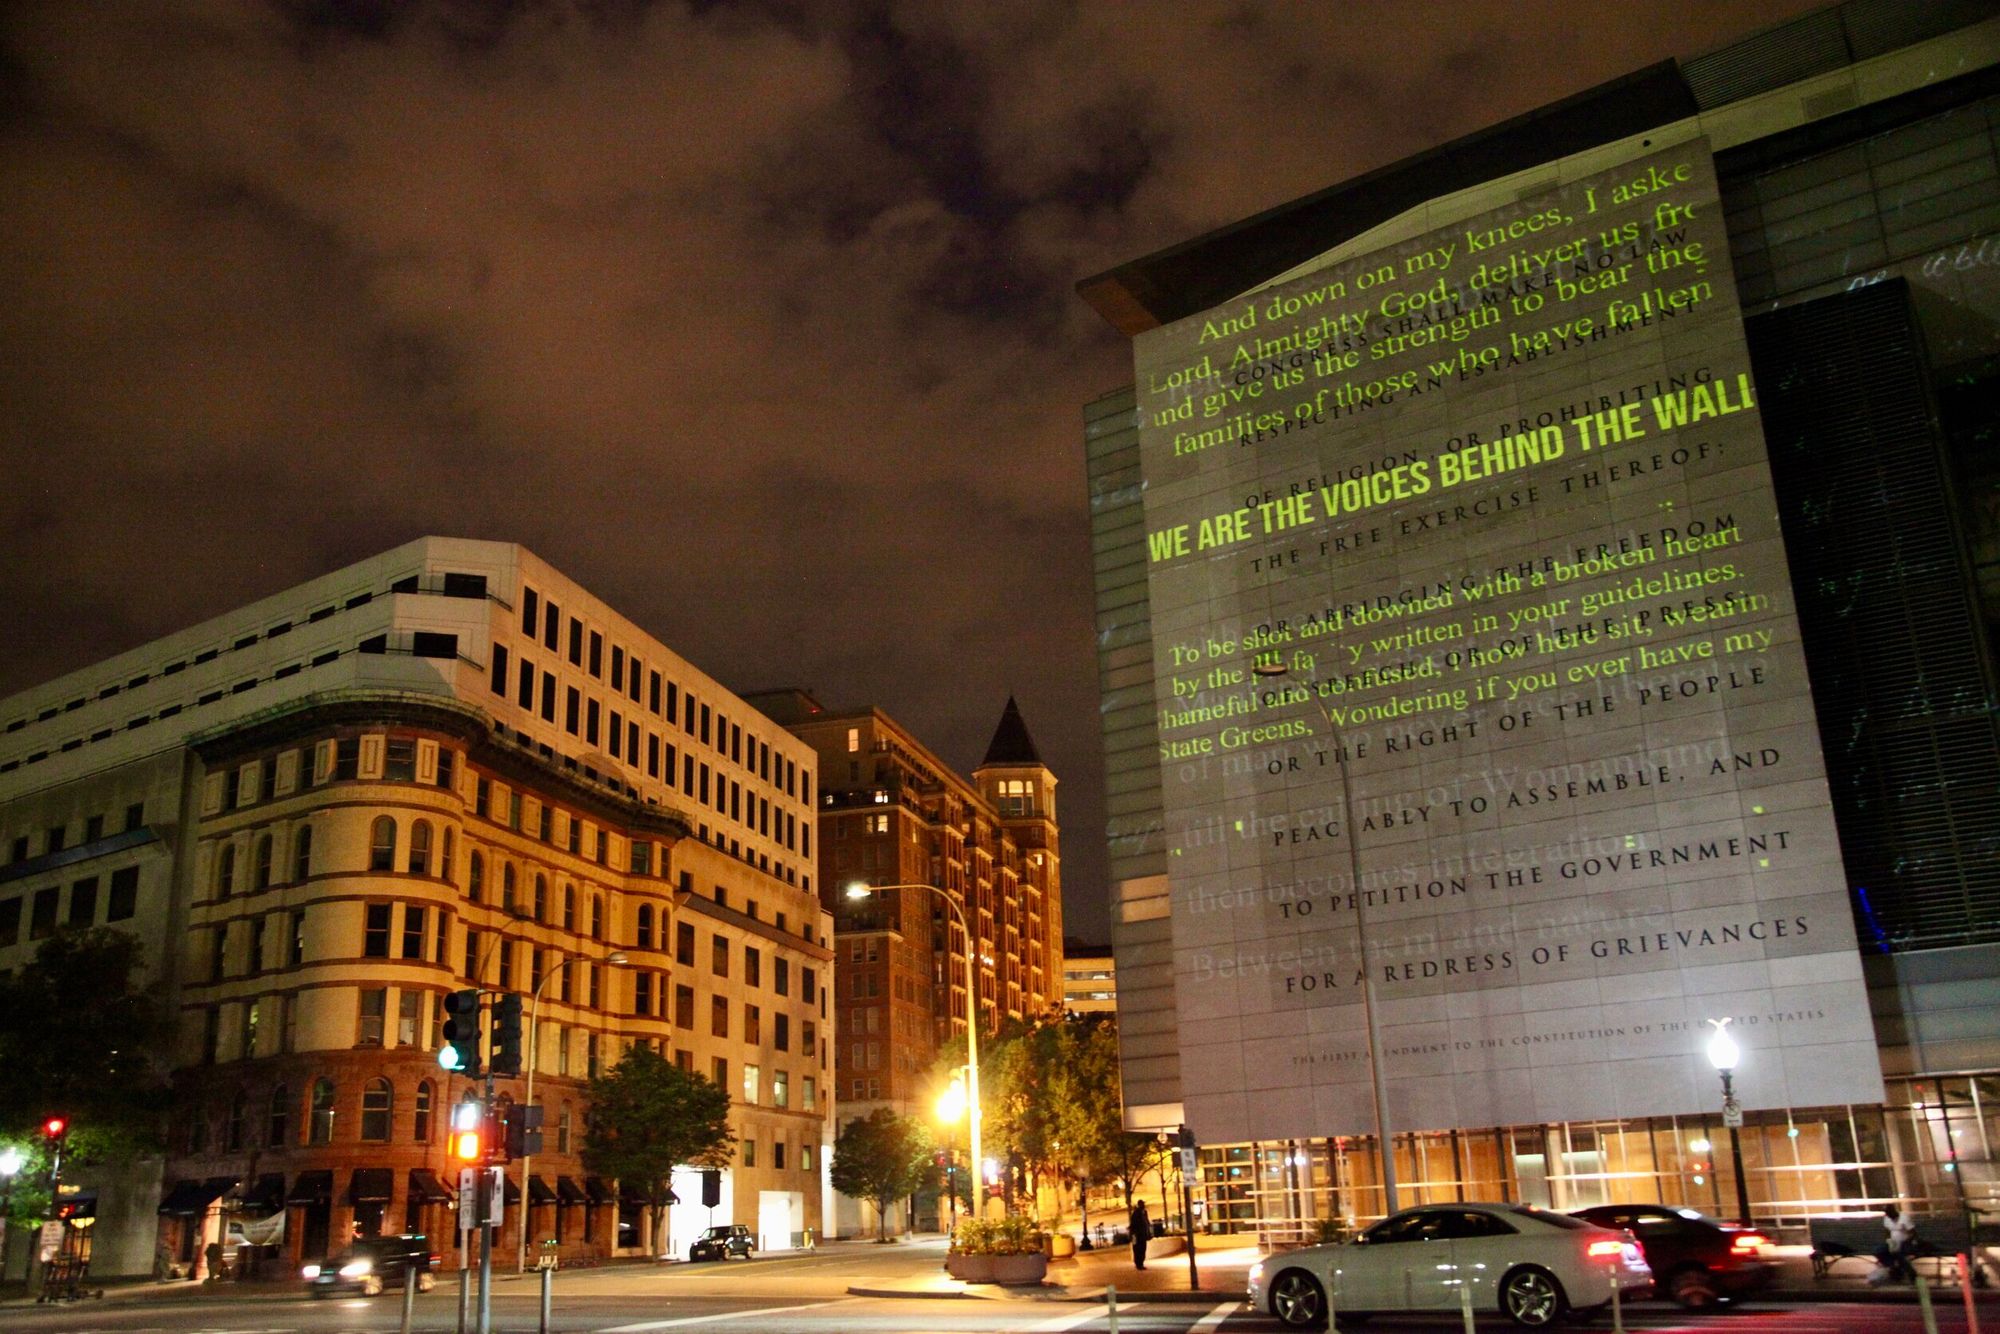 A street scene set at night that shows two buildings. On one building to the right, there is a large projection of text that scales the entirety of the building. The text reads "WE ARE THE VOICES BEHIND THE WALL."